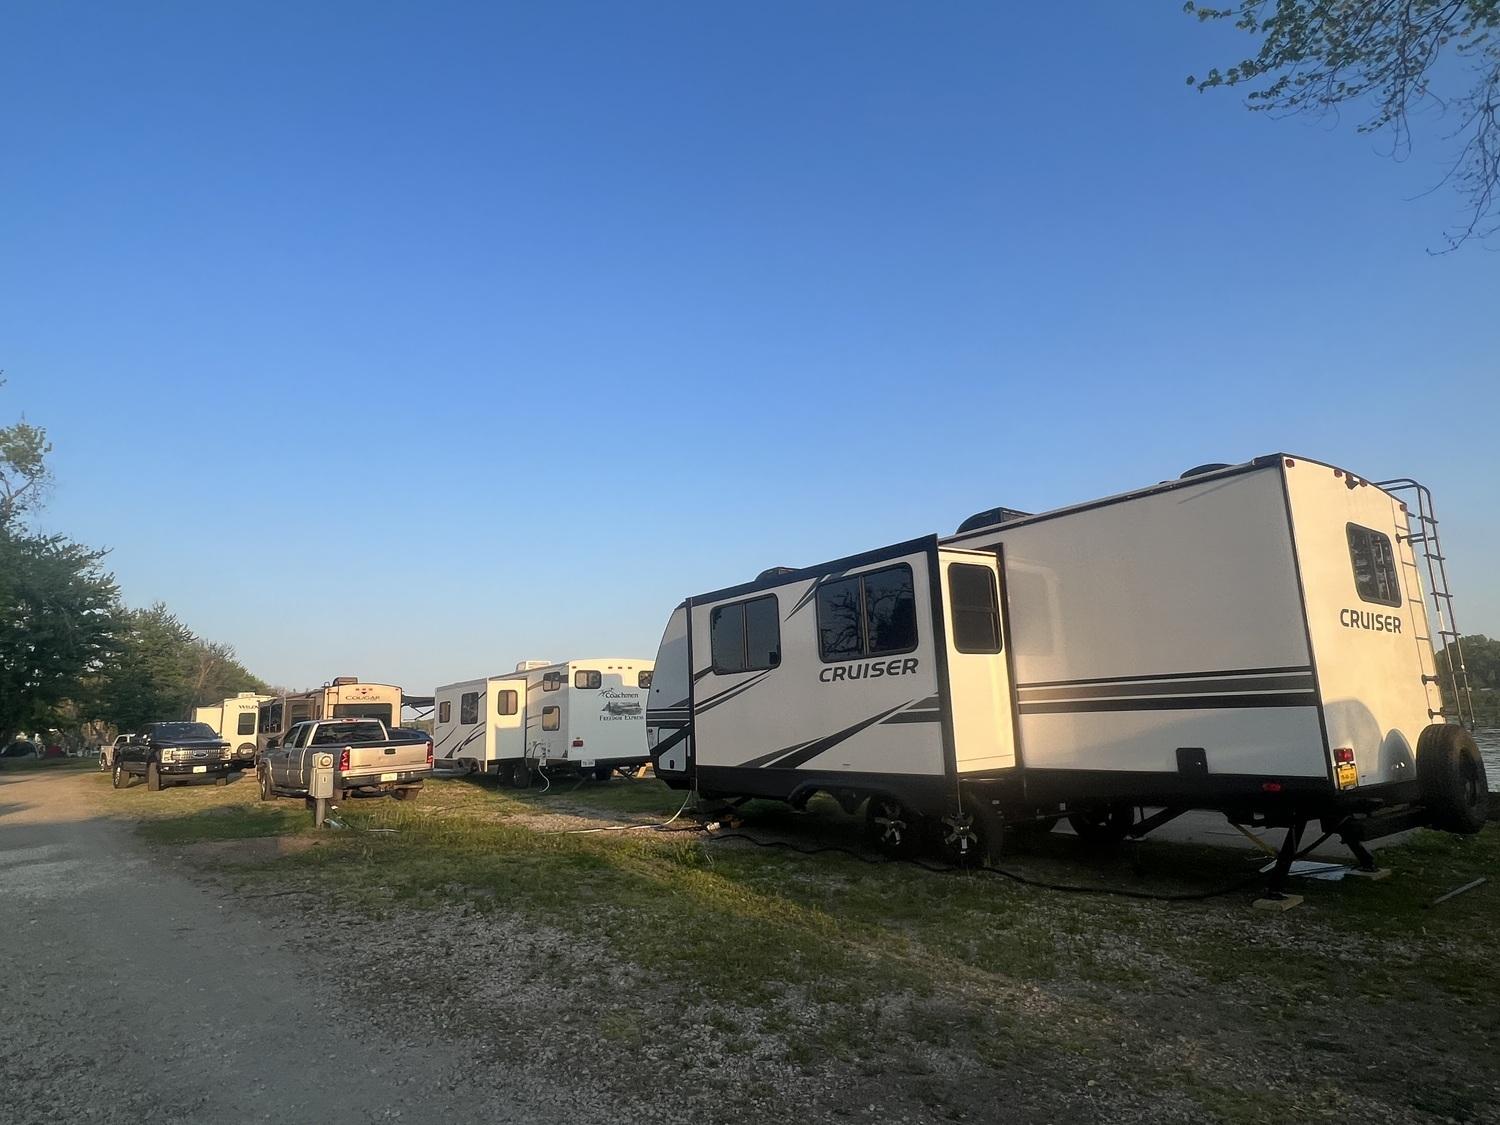 Lundeen's Landing Campground